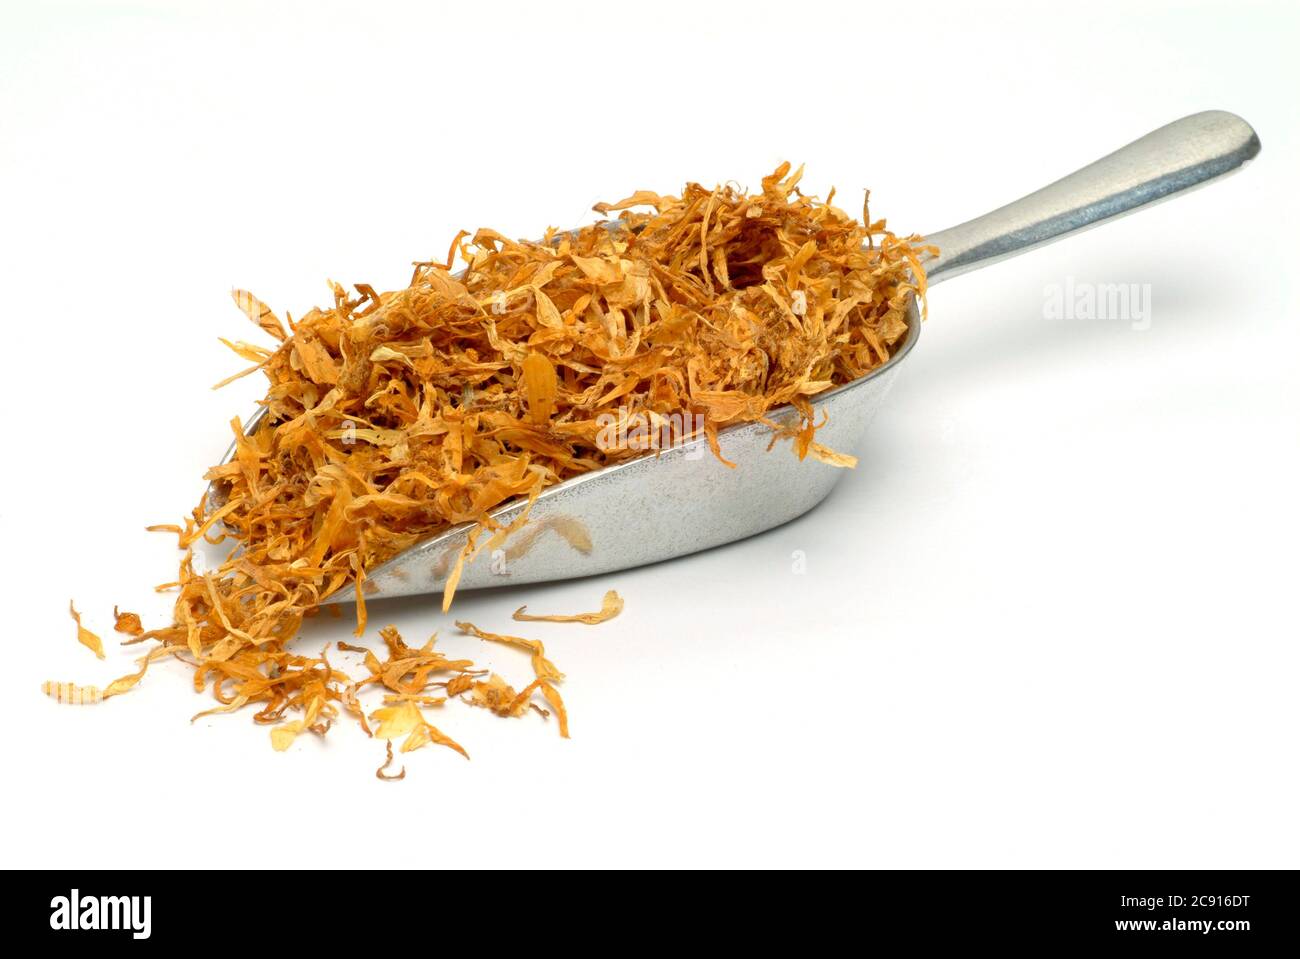 dried flowers of calendula, Calendula officinalis. Pharmaceutically the dried flower heads are used. The pharmaceutical drug reduces inflammation and Stock Photo